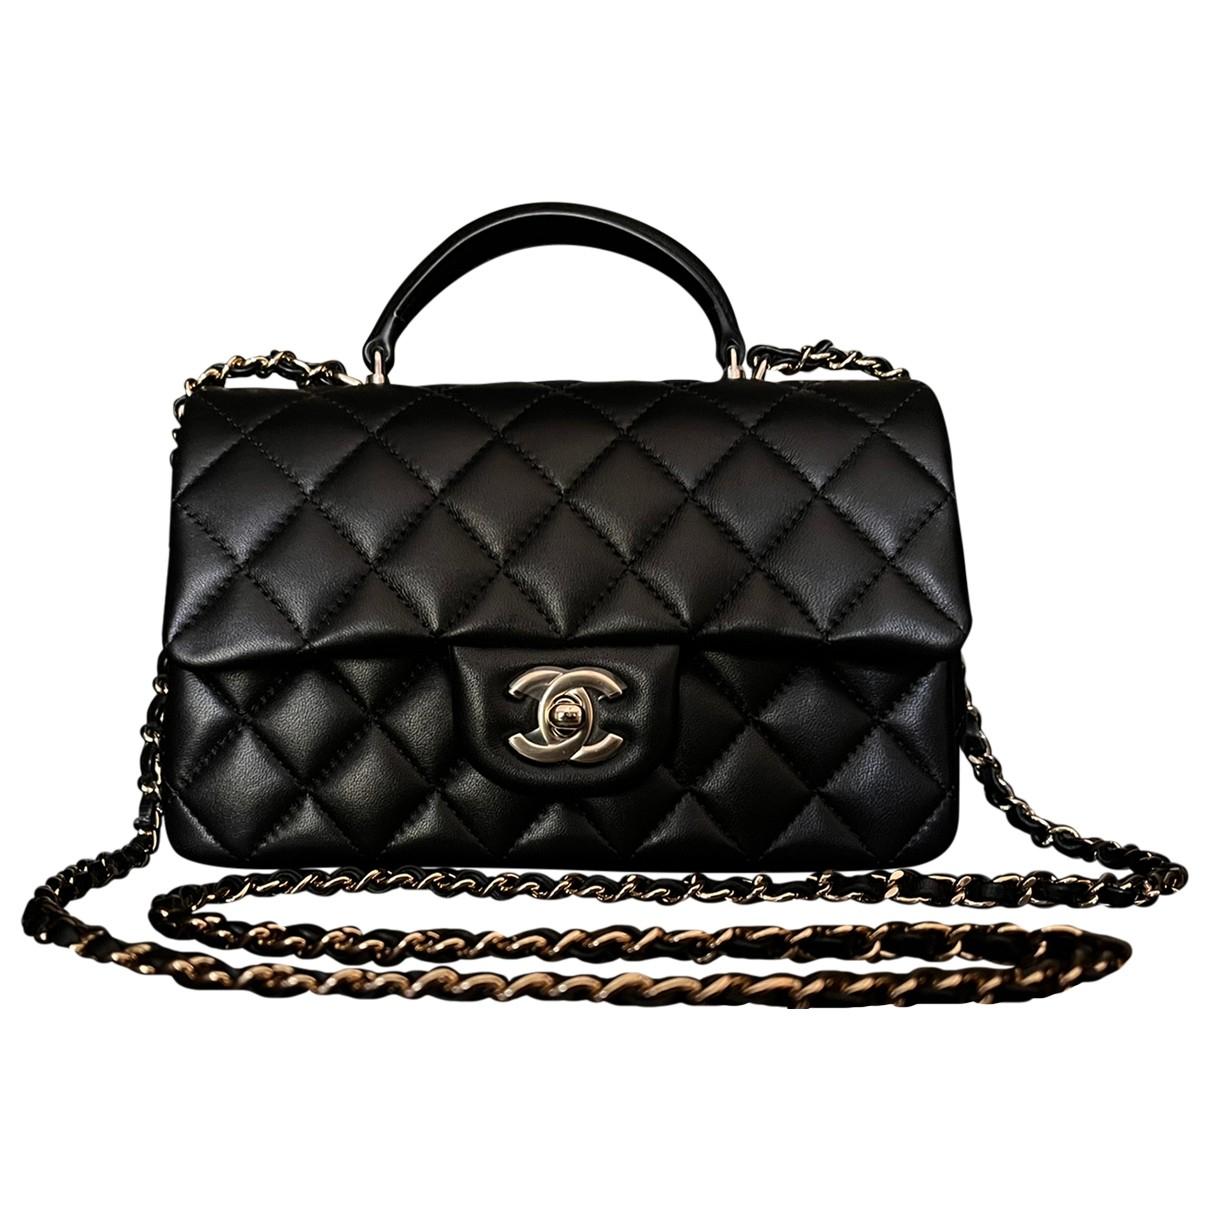 Timeless/classique leather handbag Chanel Black in Leather - 31690228